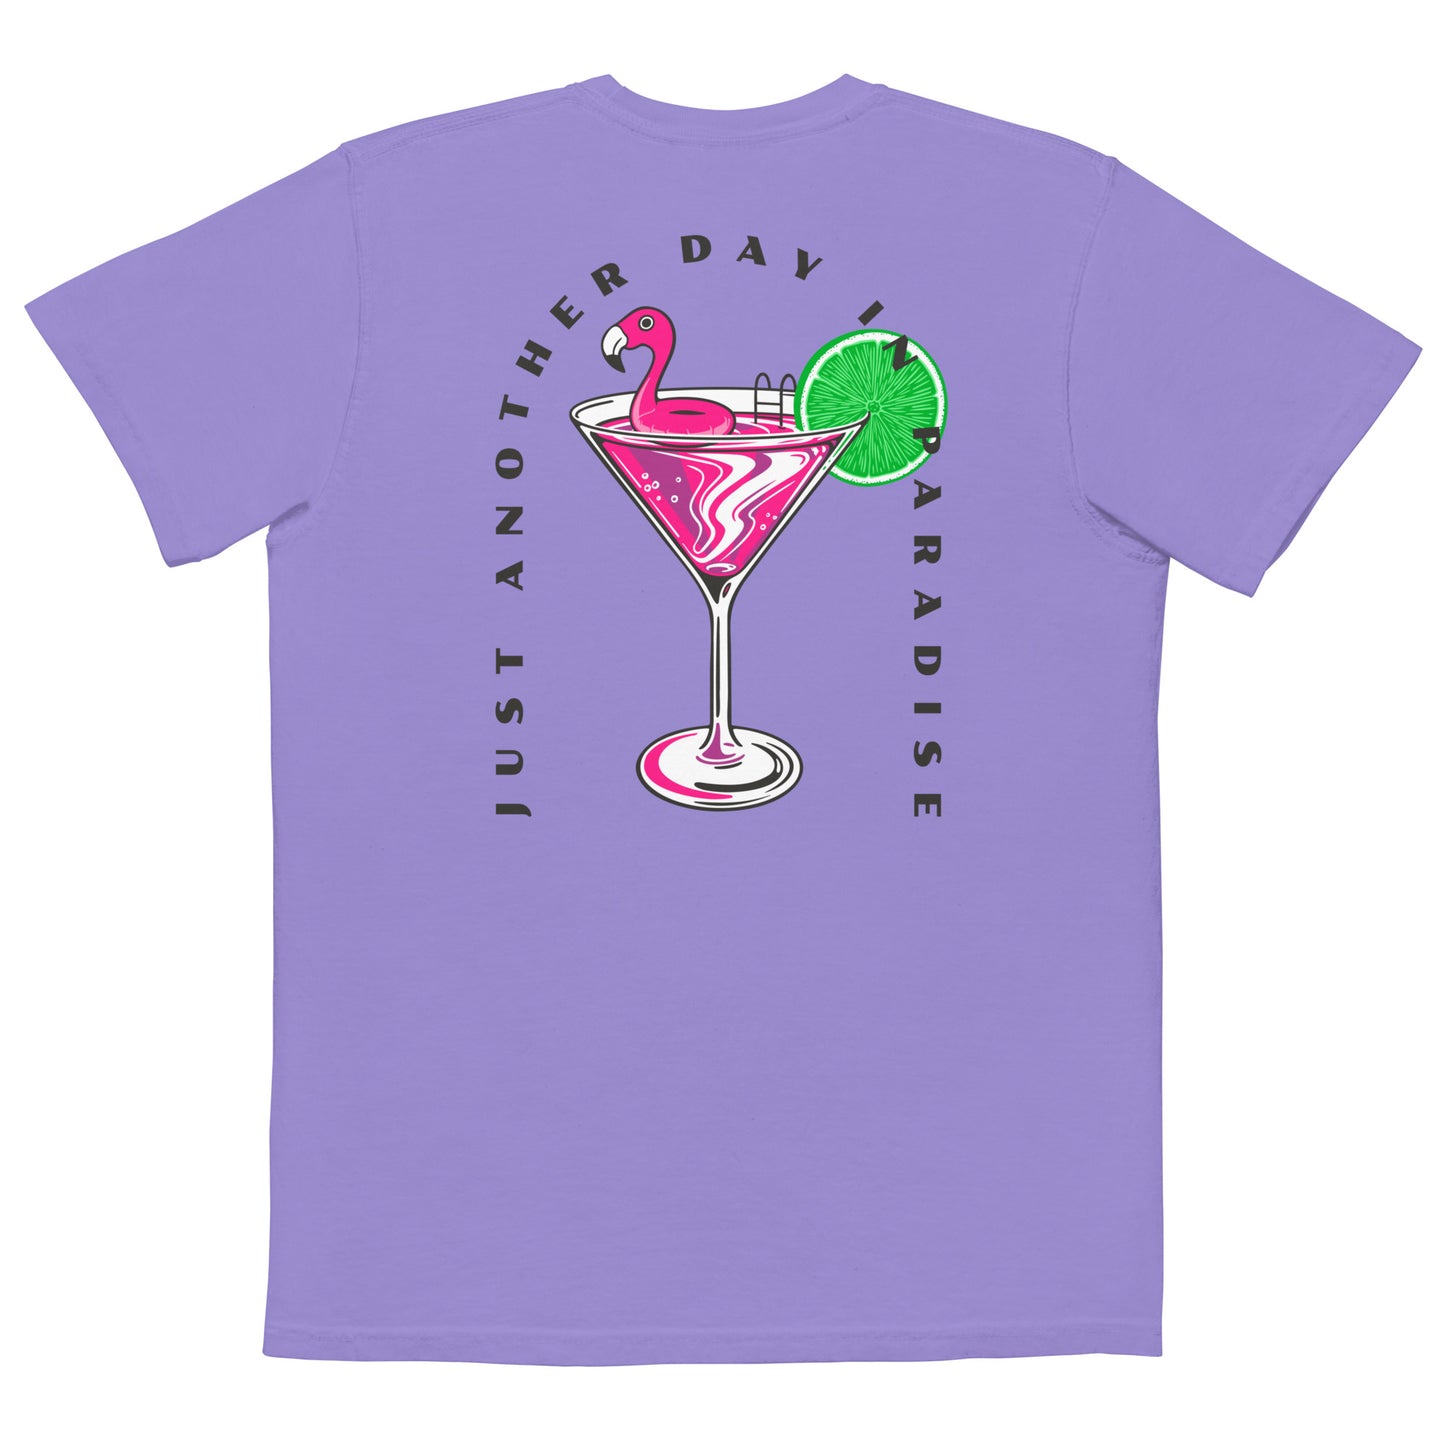 Another Day in Paradise Pocket Tee